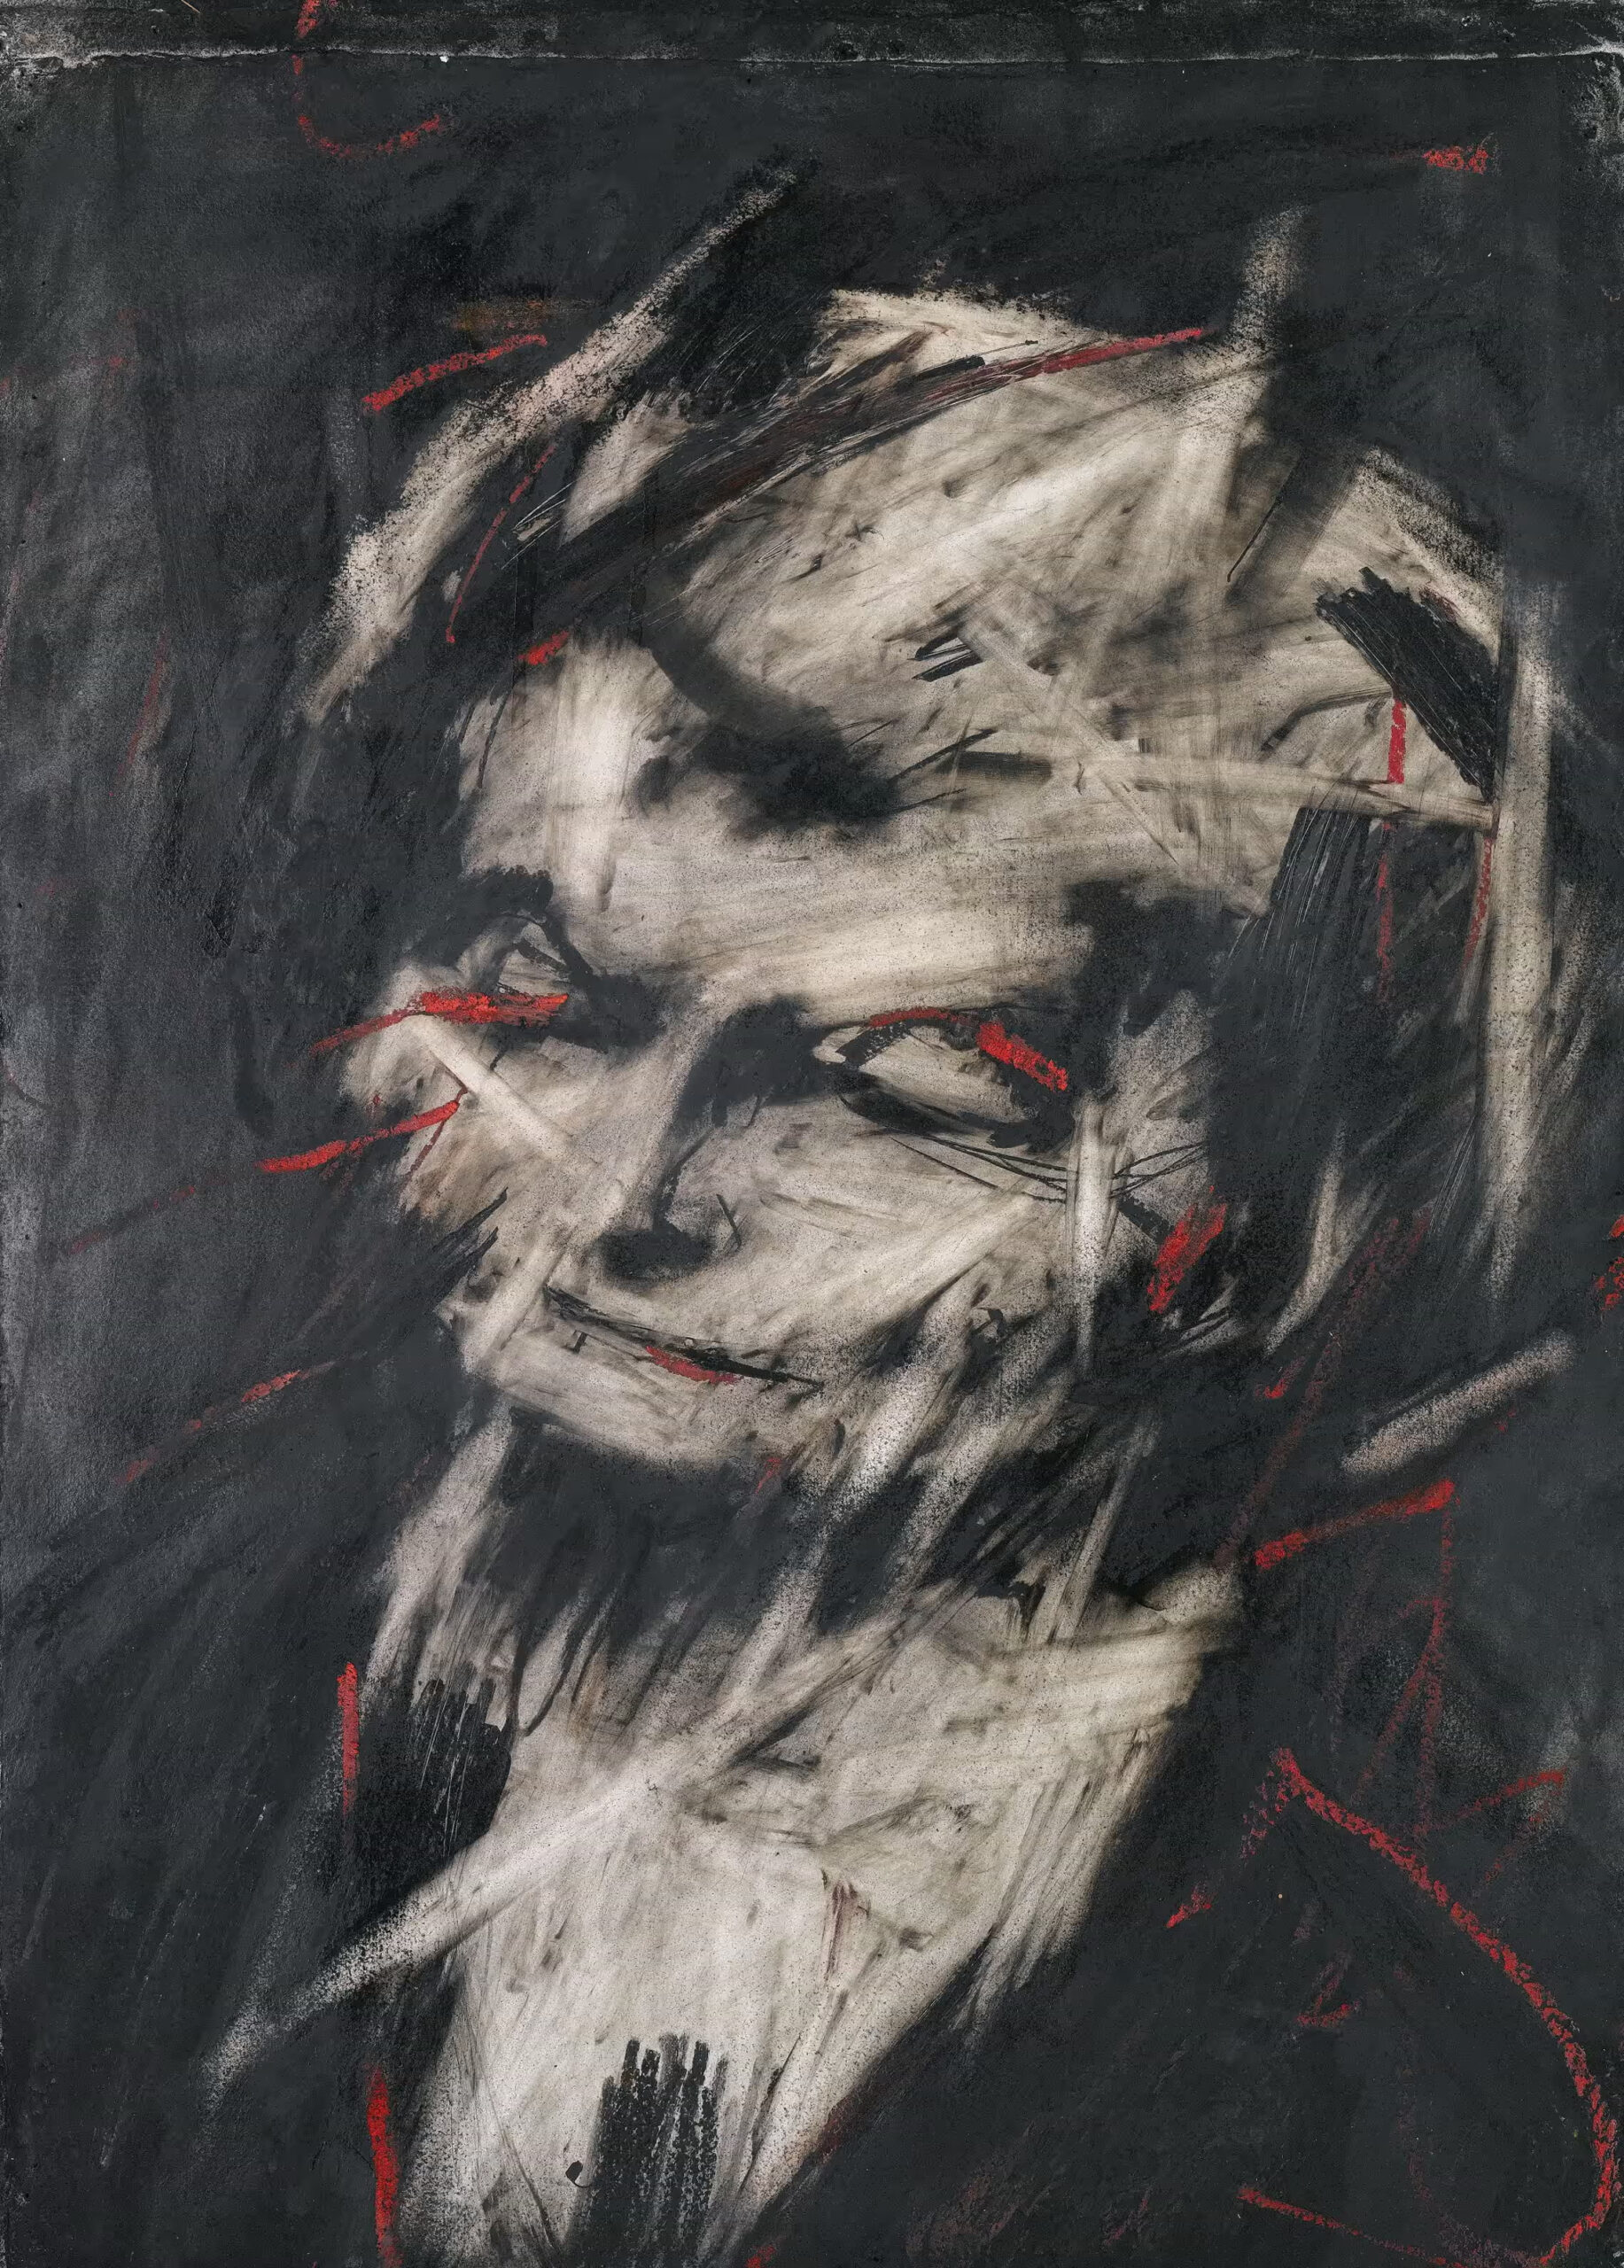 Frank Auerbach, Head of Helen Gillespie II, 1962, The Charcoal Heads, The Courtauld Gallery, Fotoğraf: courtesy of Frankie Rossi Art Projects, London